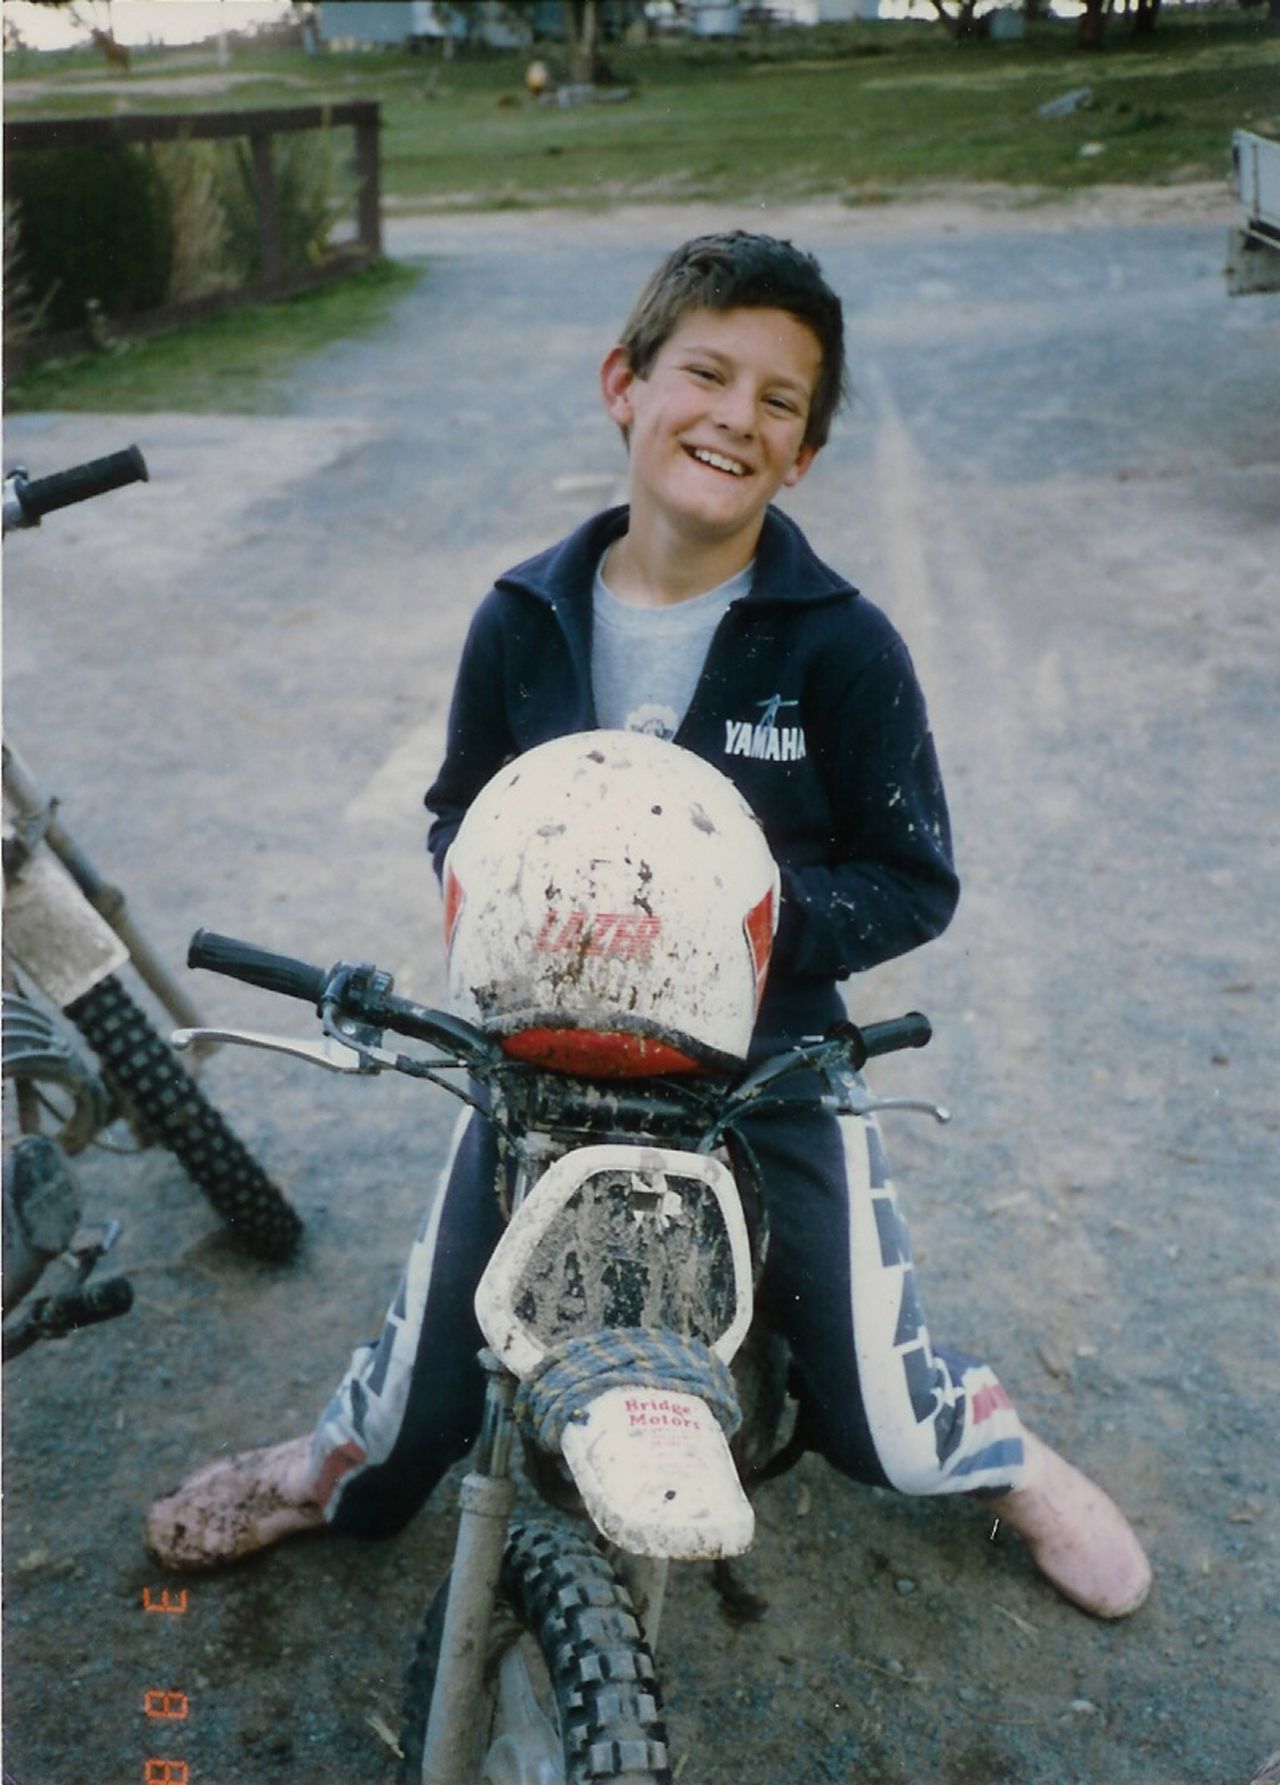 Webber's first love was for motorbikes, and he used to race them as a youngster, before turning to go-karts when he was a teenager.